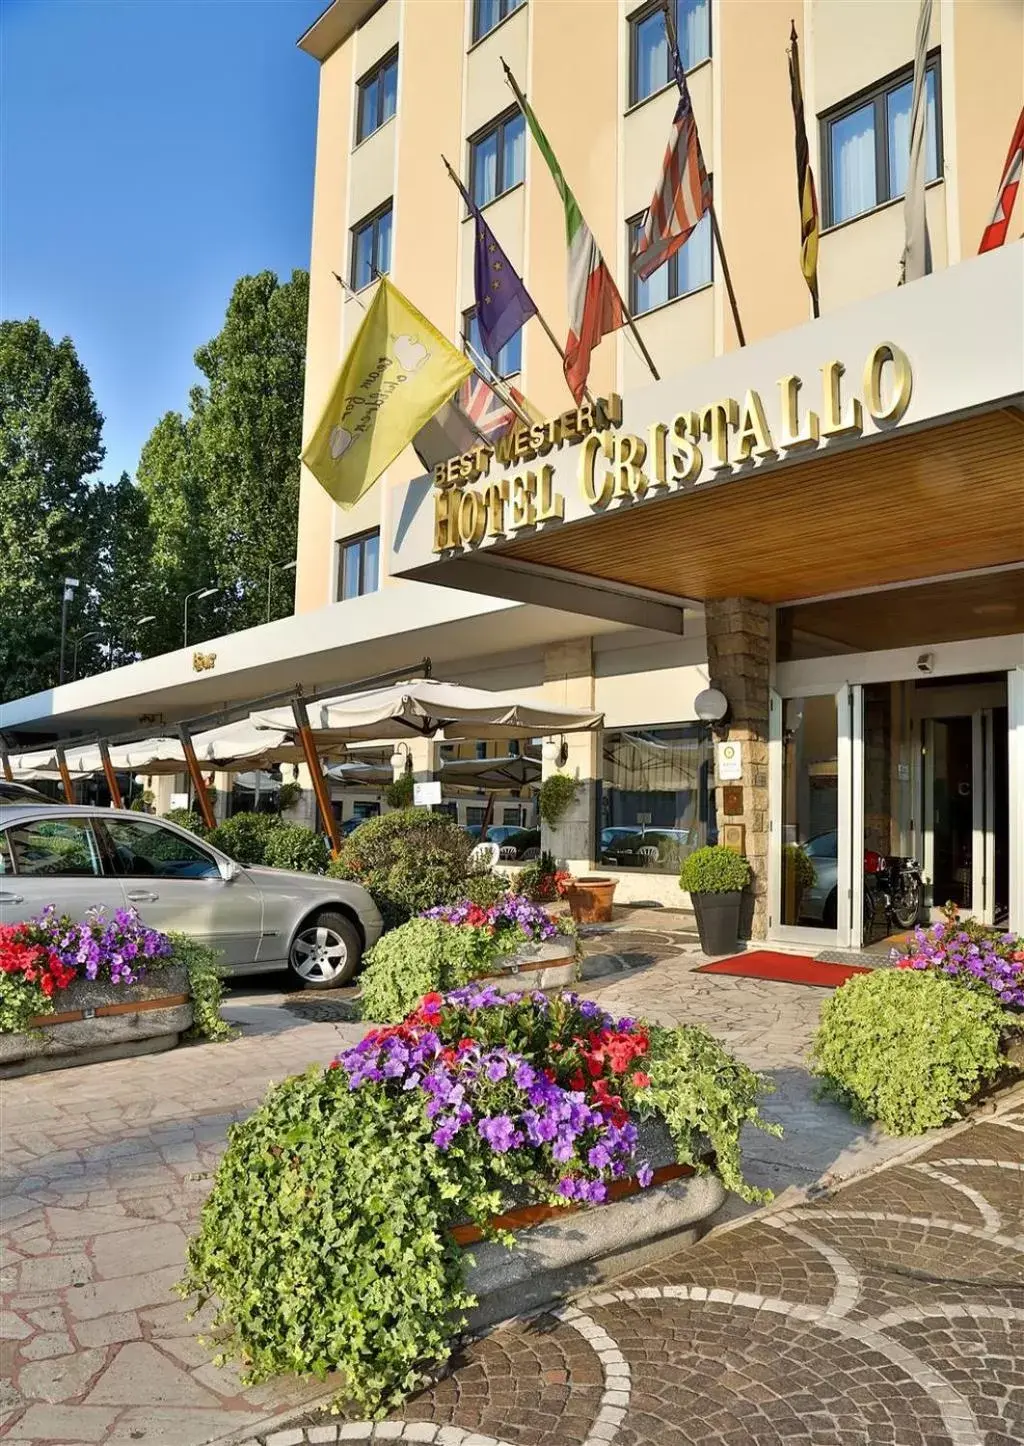 Property Building in Best Western Hotel Cristallo